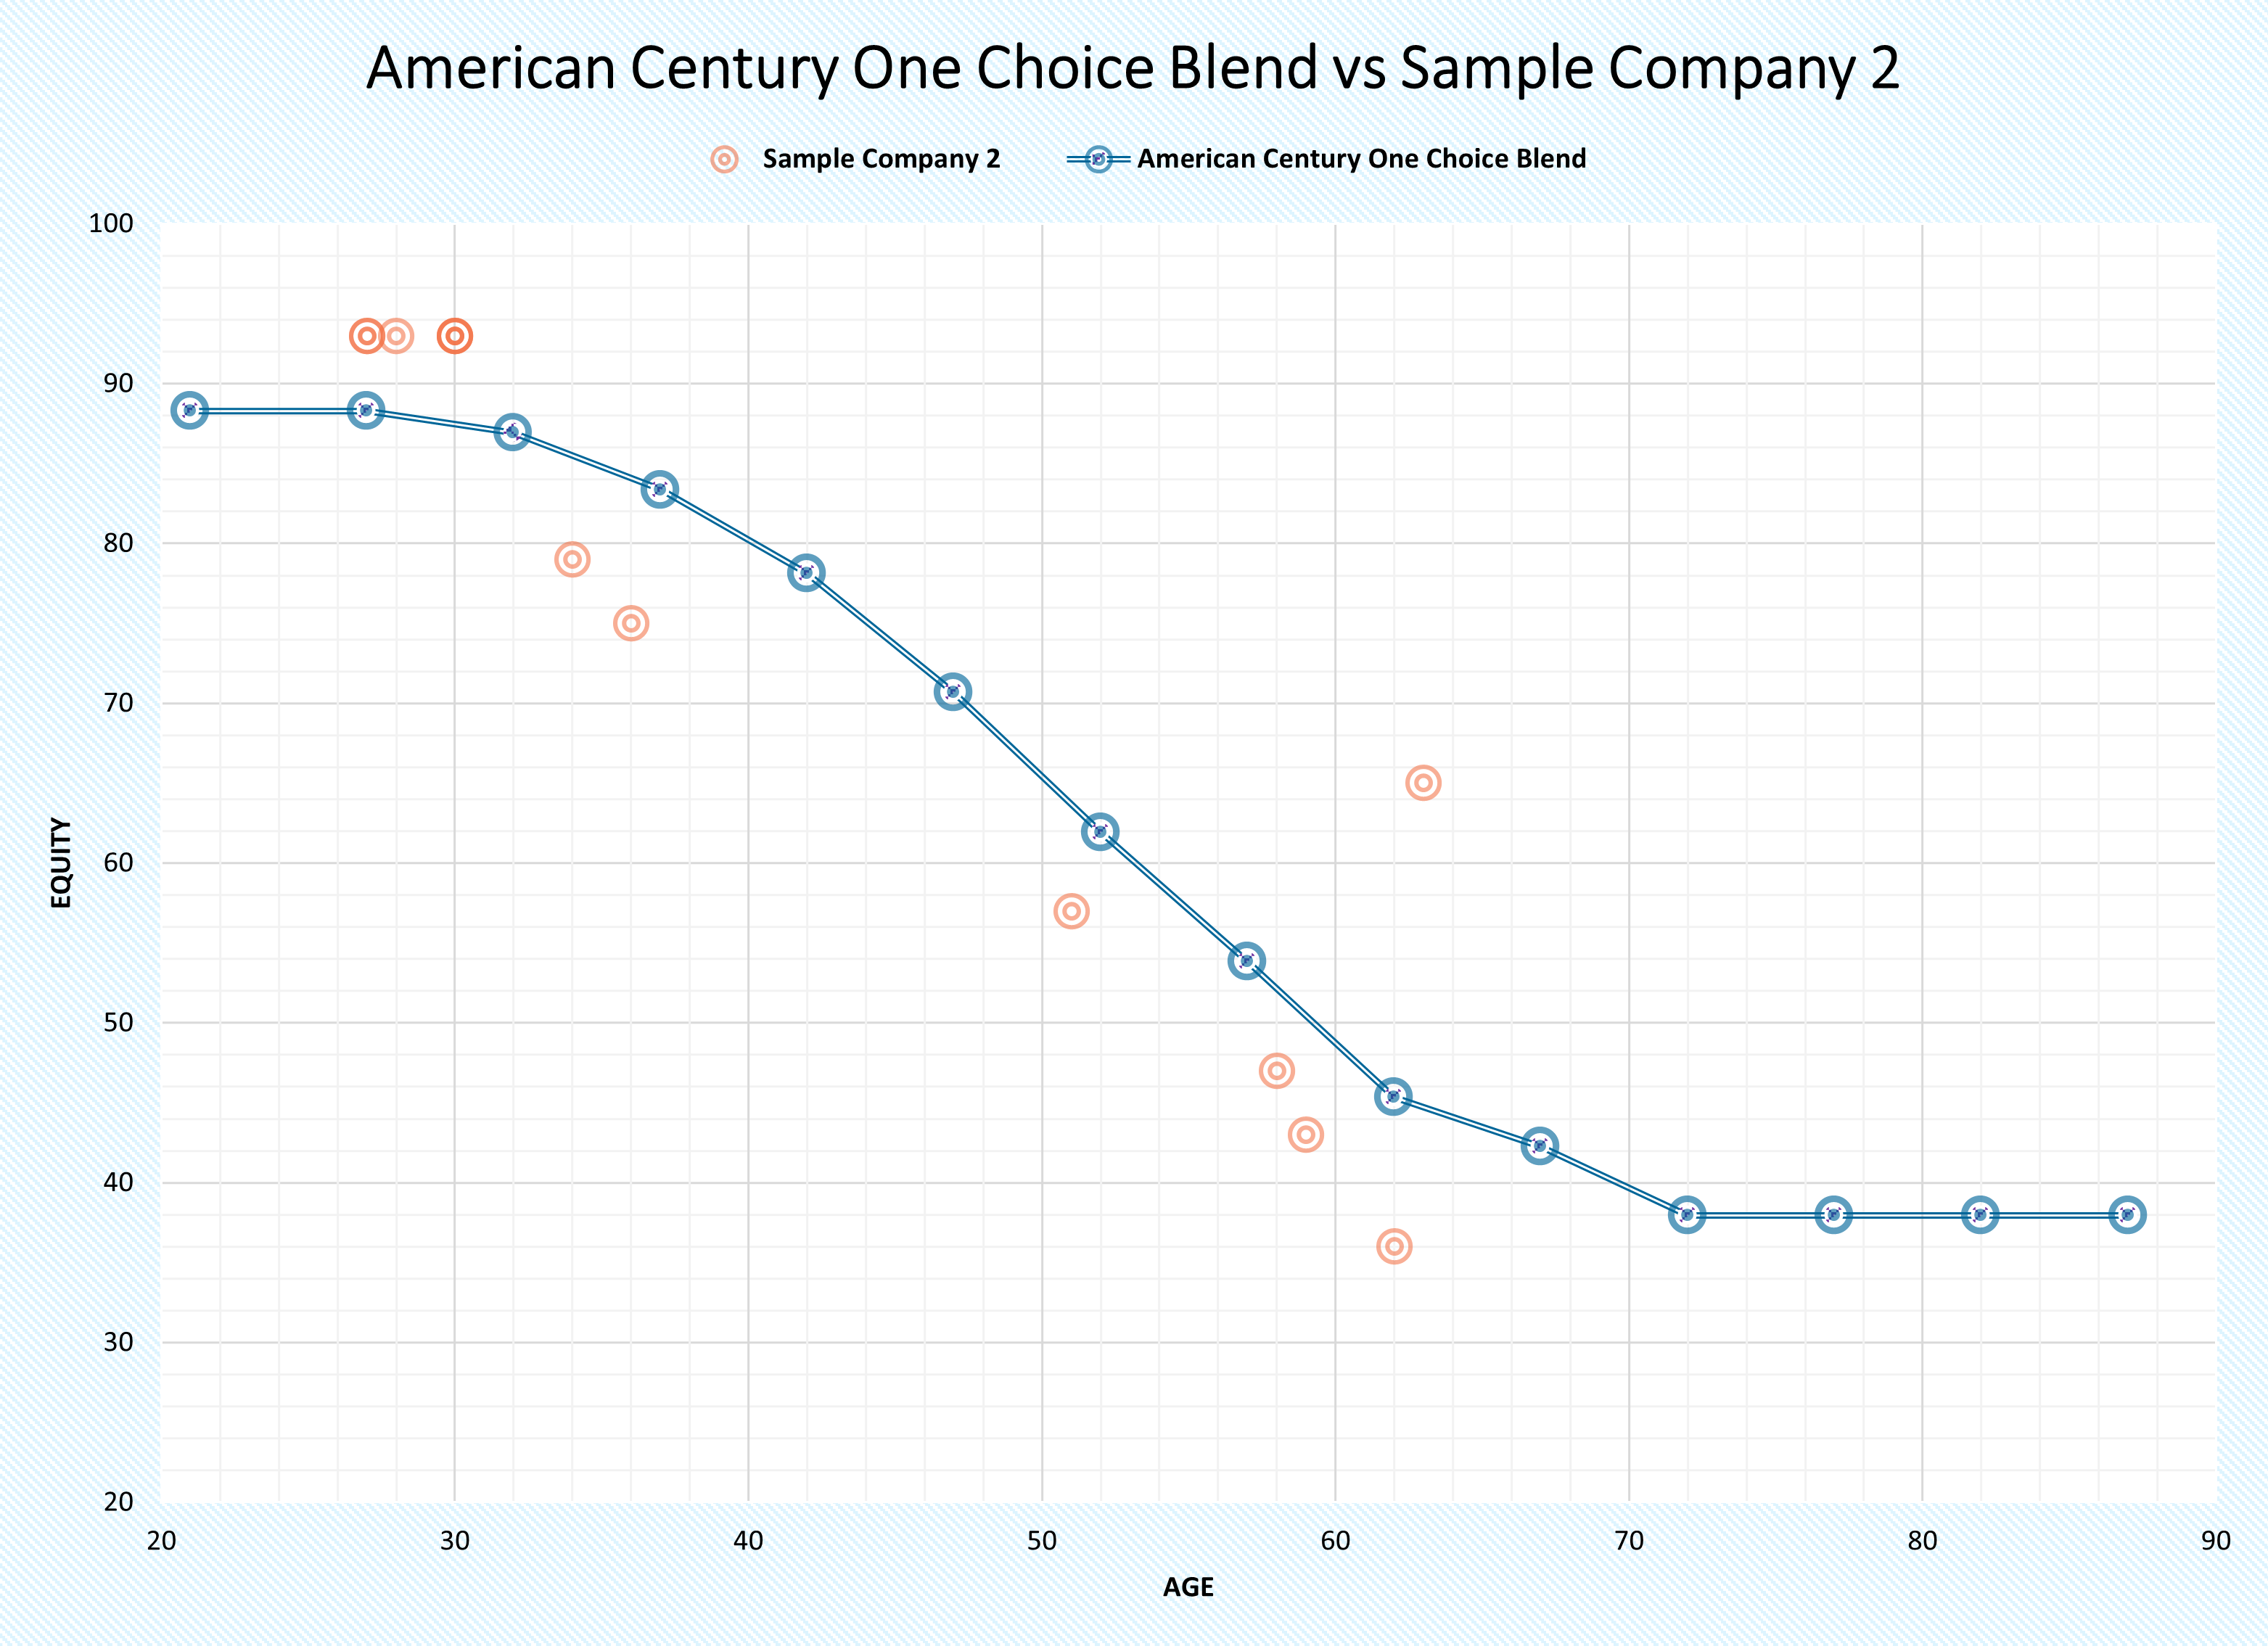 American Century One Choice and Blend vs Sample Company 2